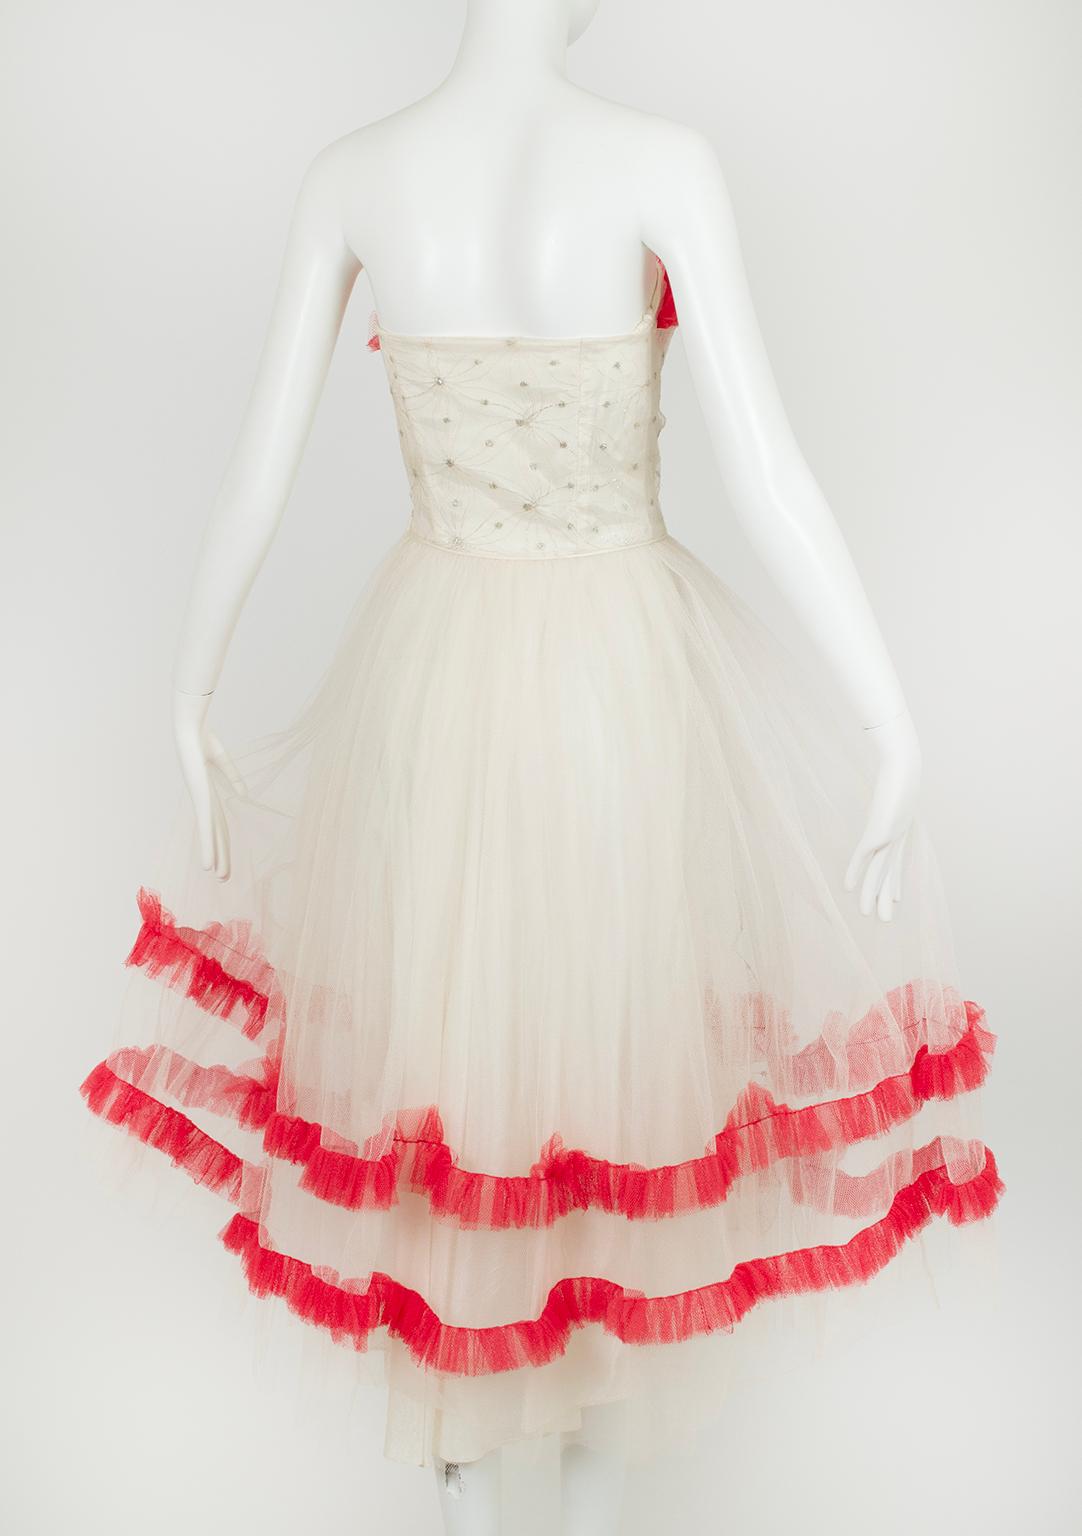 White and Silver Ballerina or Wedding Dress with Removable Red Trim – XS, 1950s 2